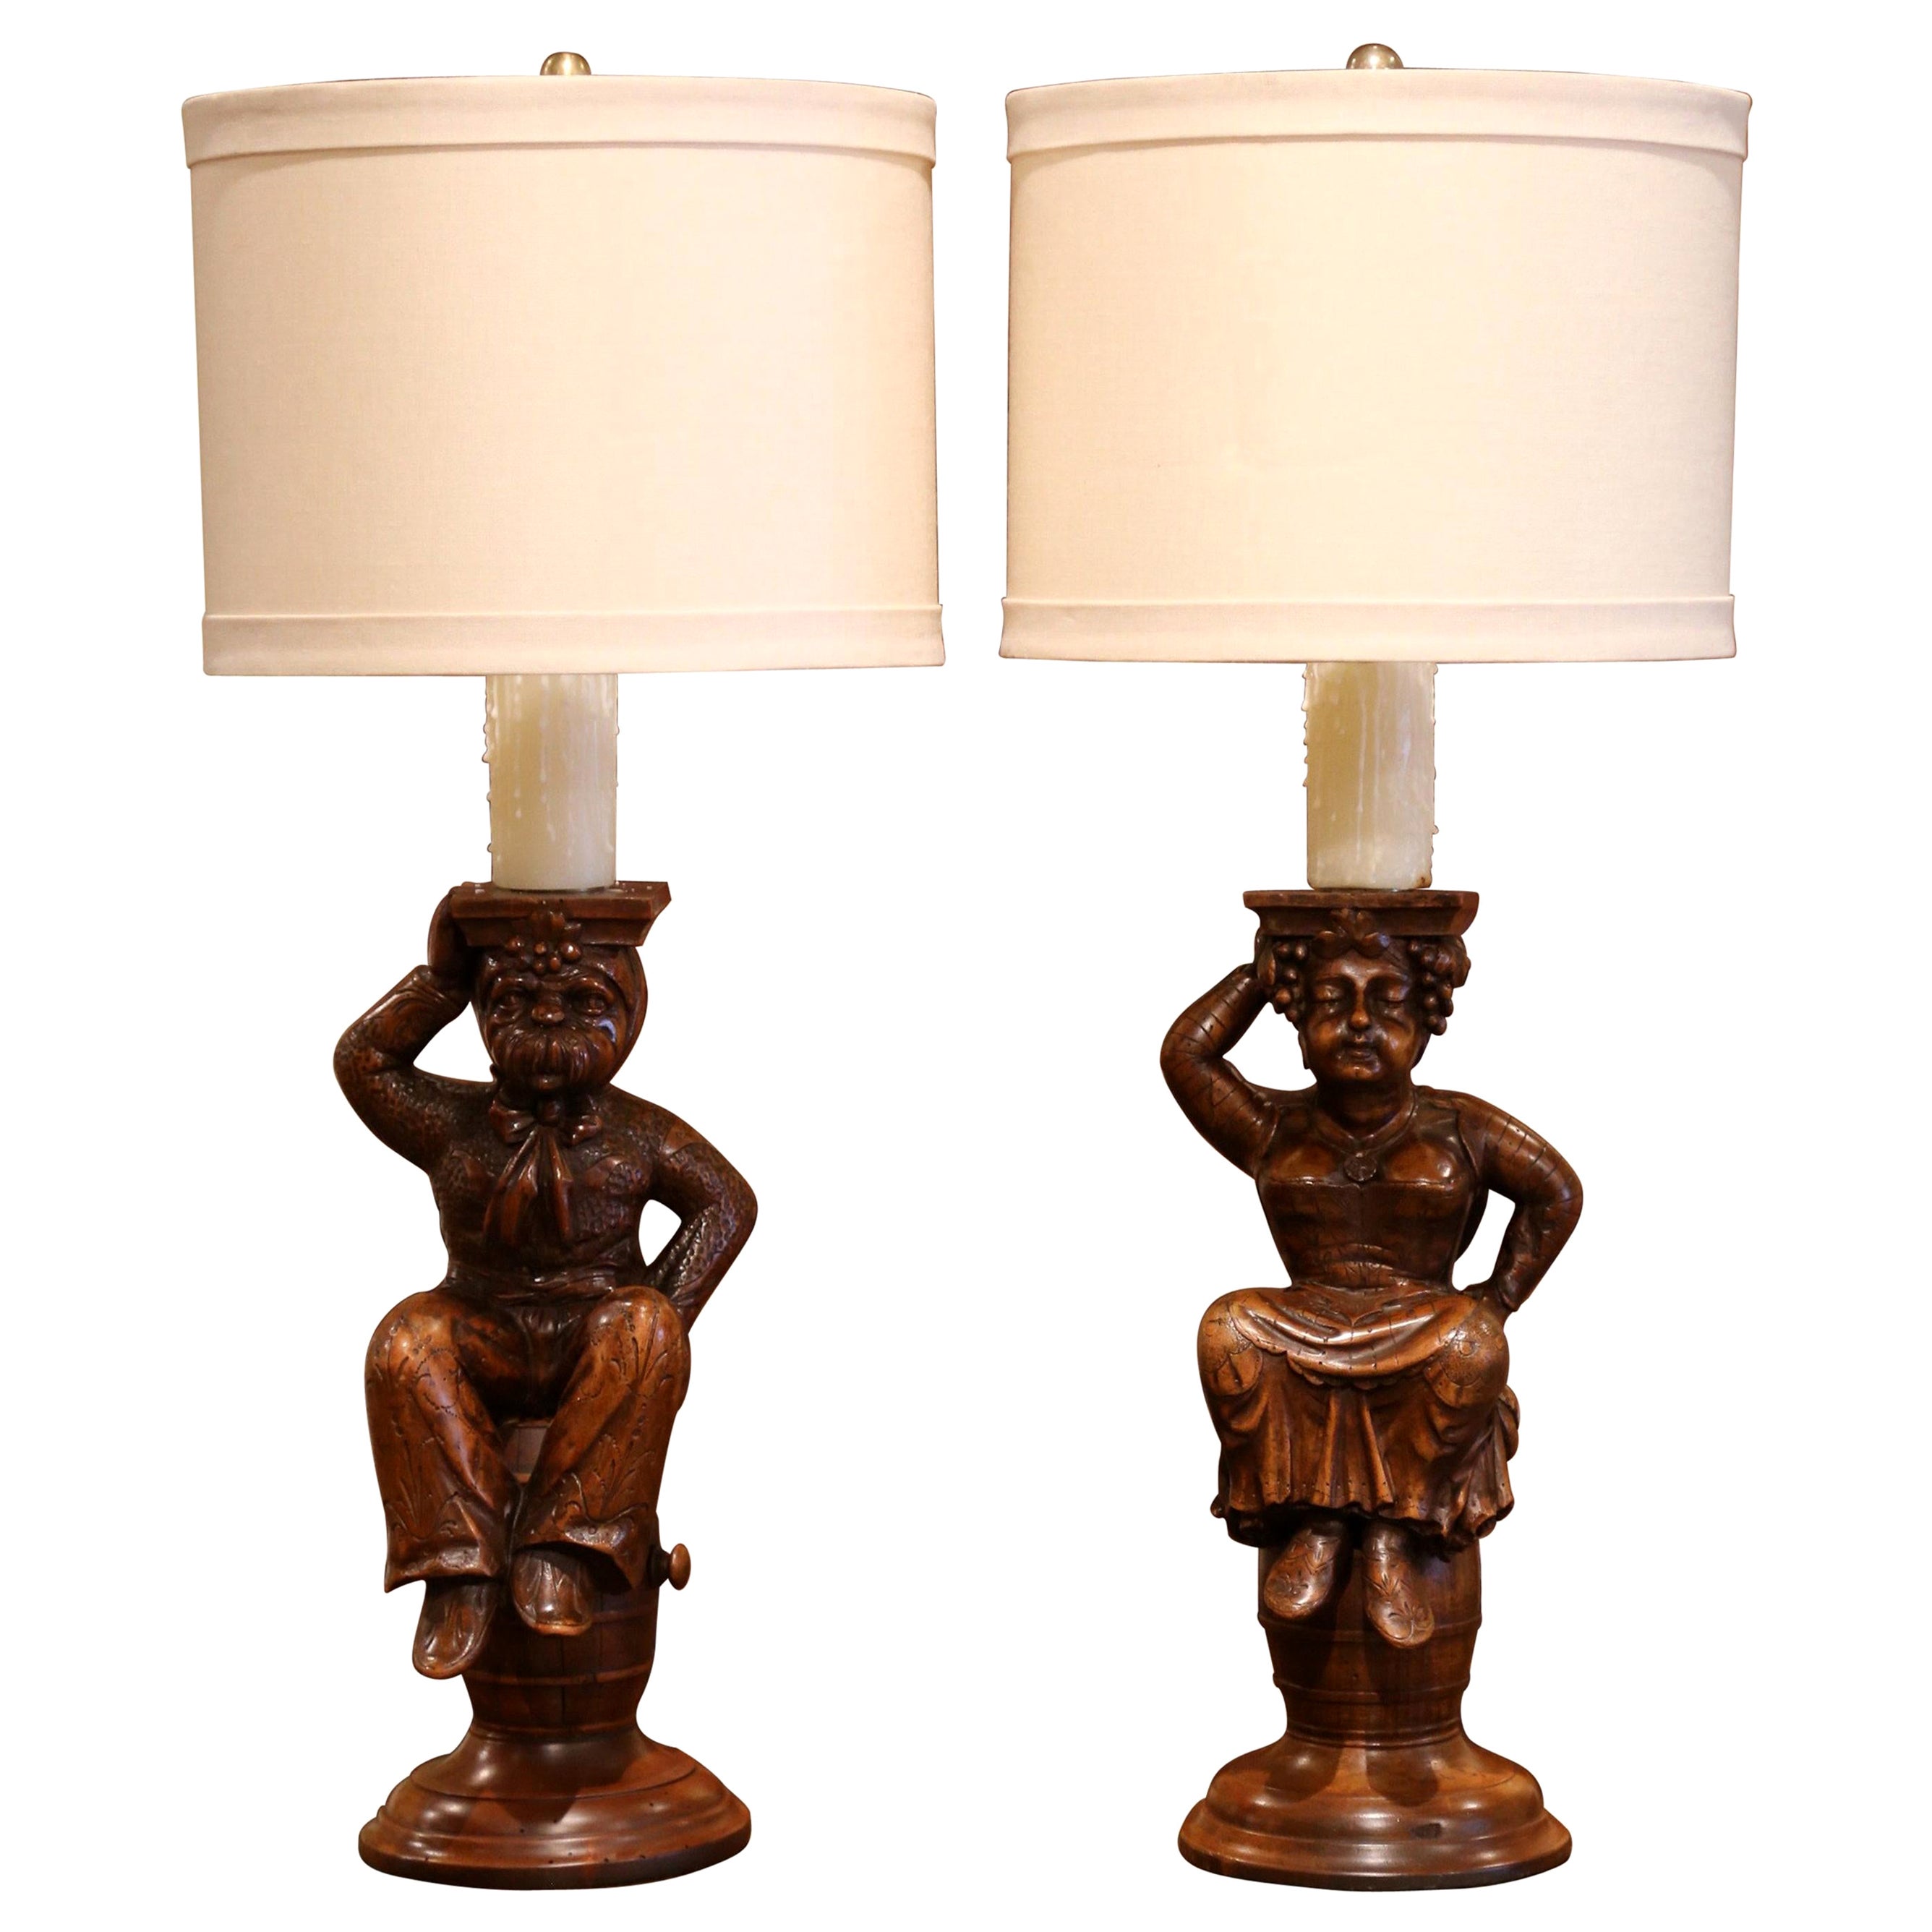 Pair of 19th Century French Carved Walnut Cabaret Figures Lamp Bases